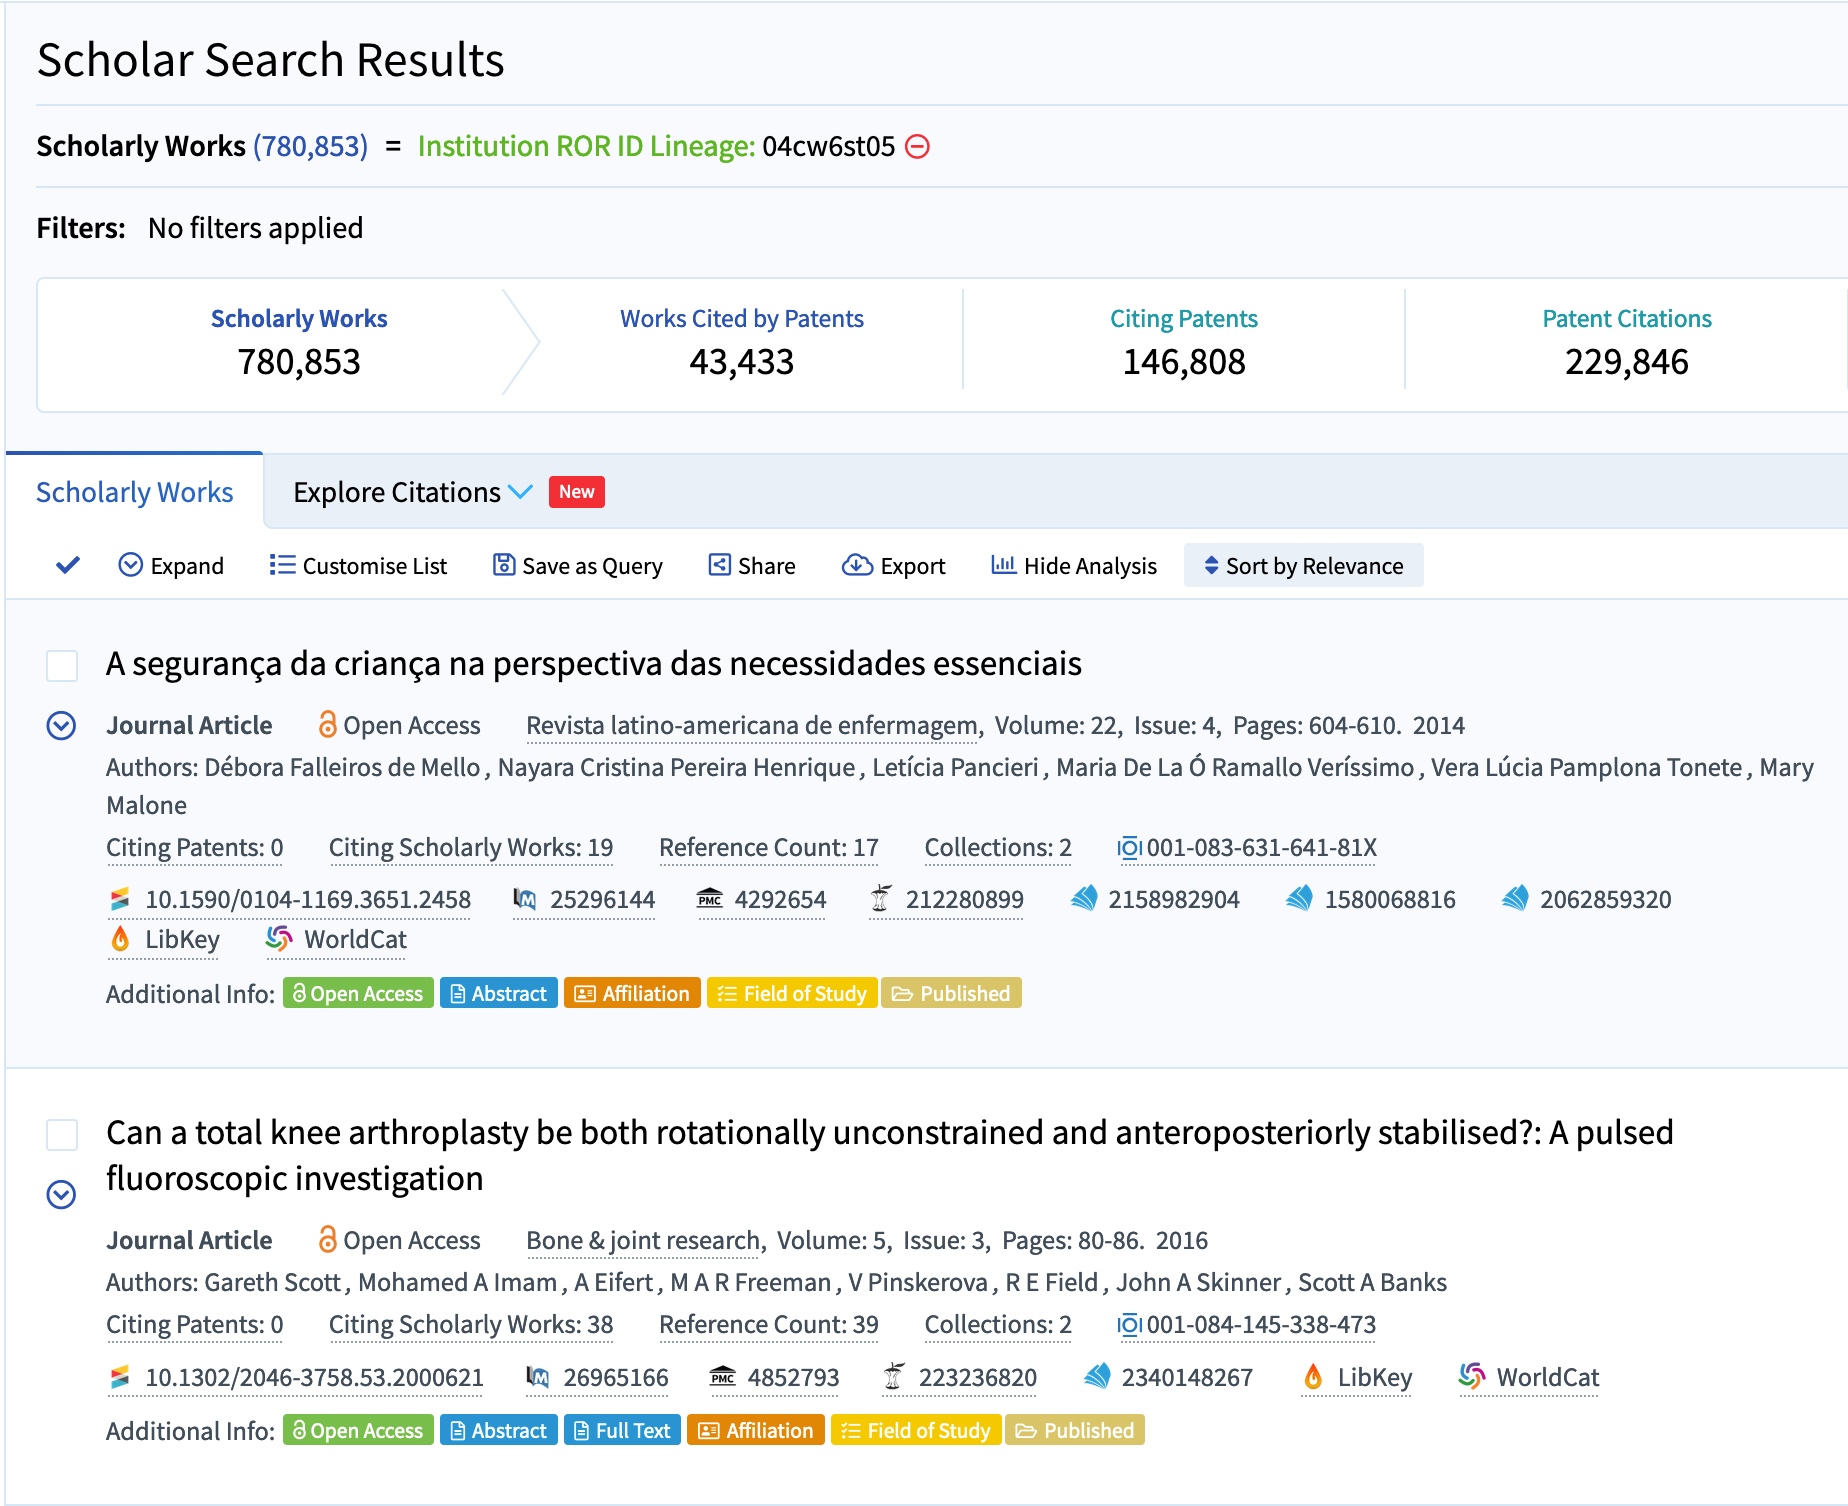 The Lens's structured search for scholarly works by ROR ID showing over 780,000 works associated with the University of London and its subsidiary organizations. The Lens also offers the ability to filter results by sub-organization.